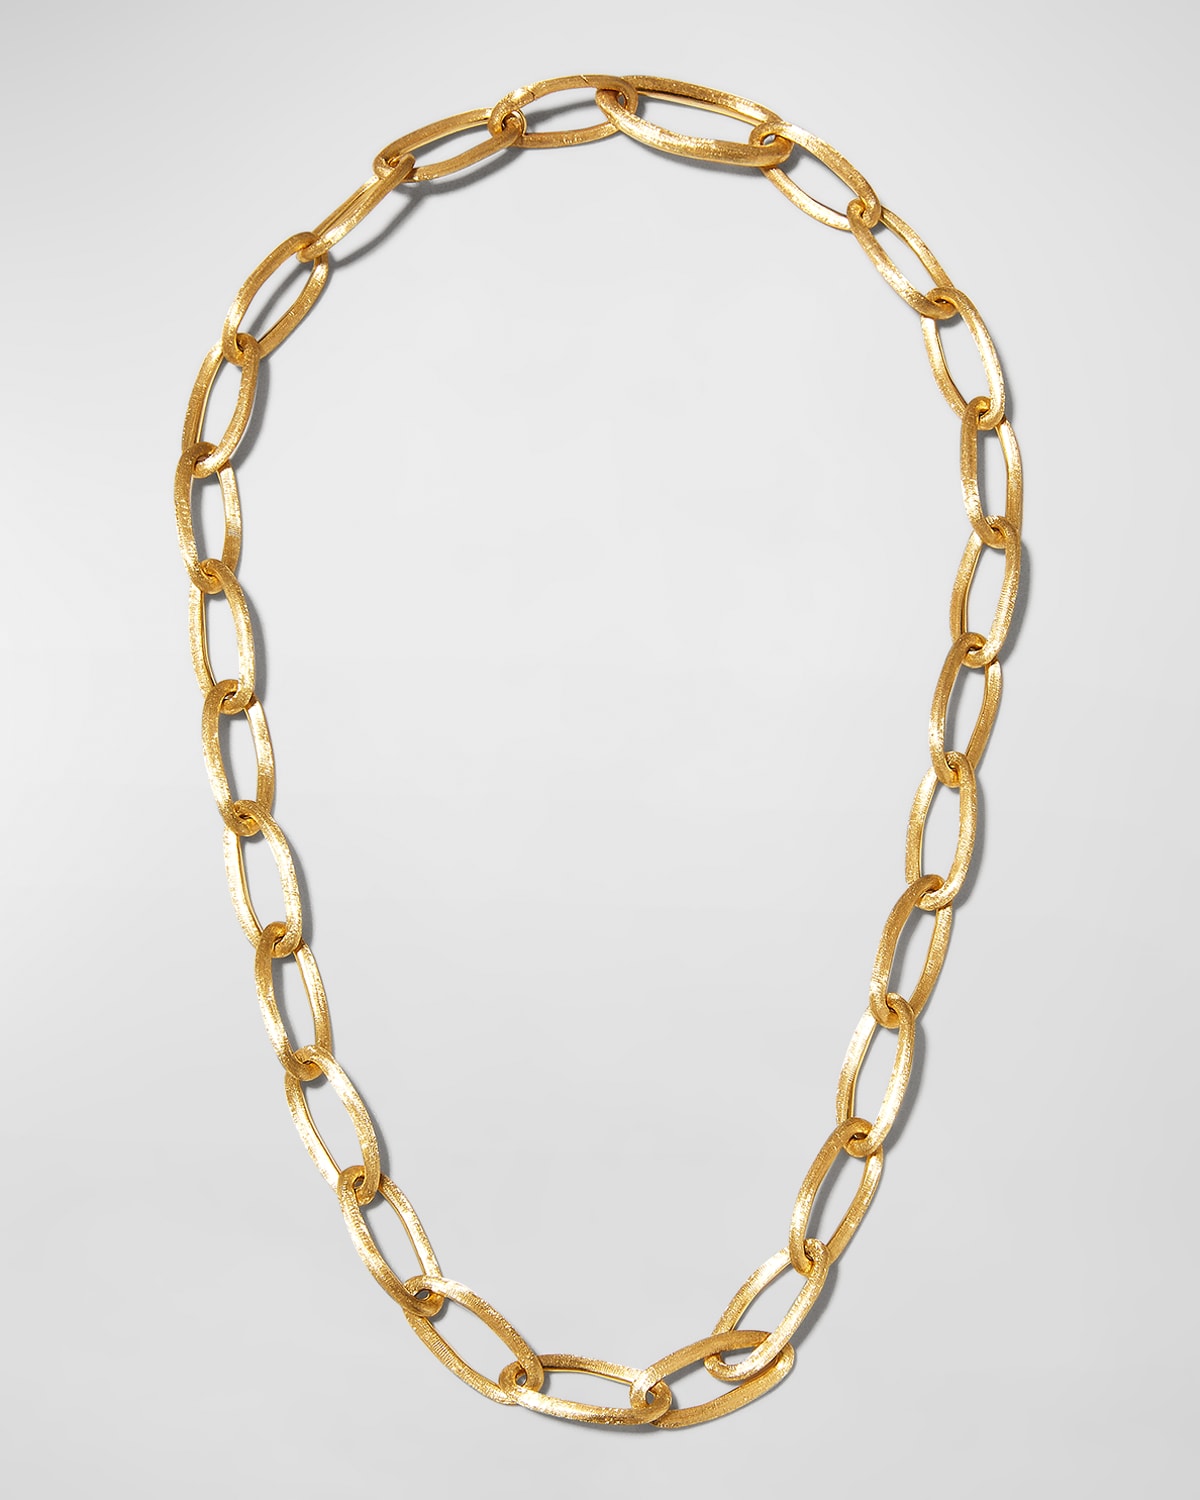 Jaipur Link 18K Yellow Gold Oval Link Convertible Lariat Necklace